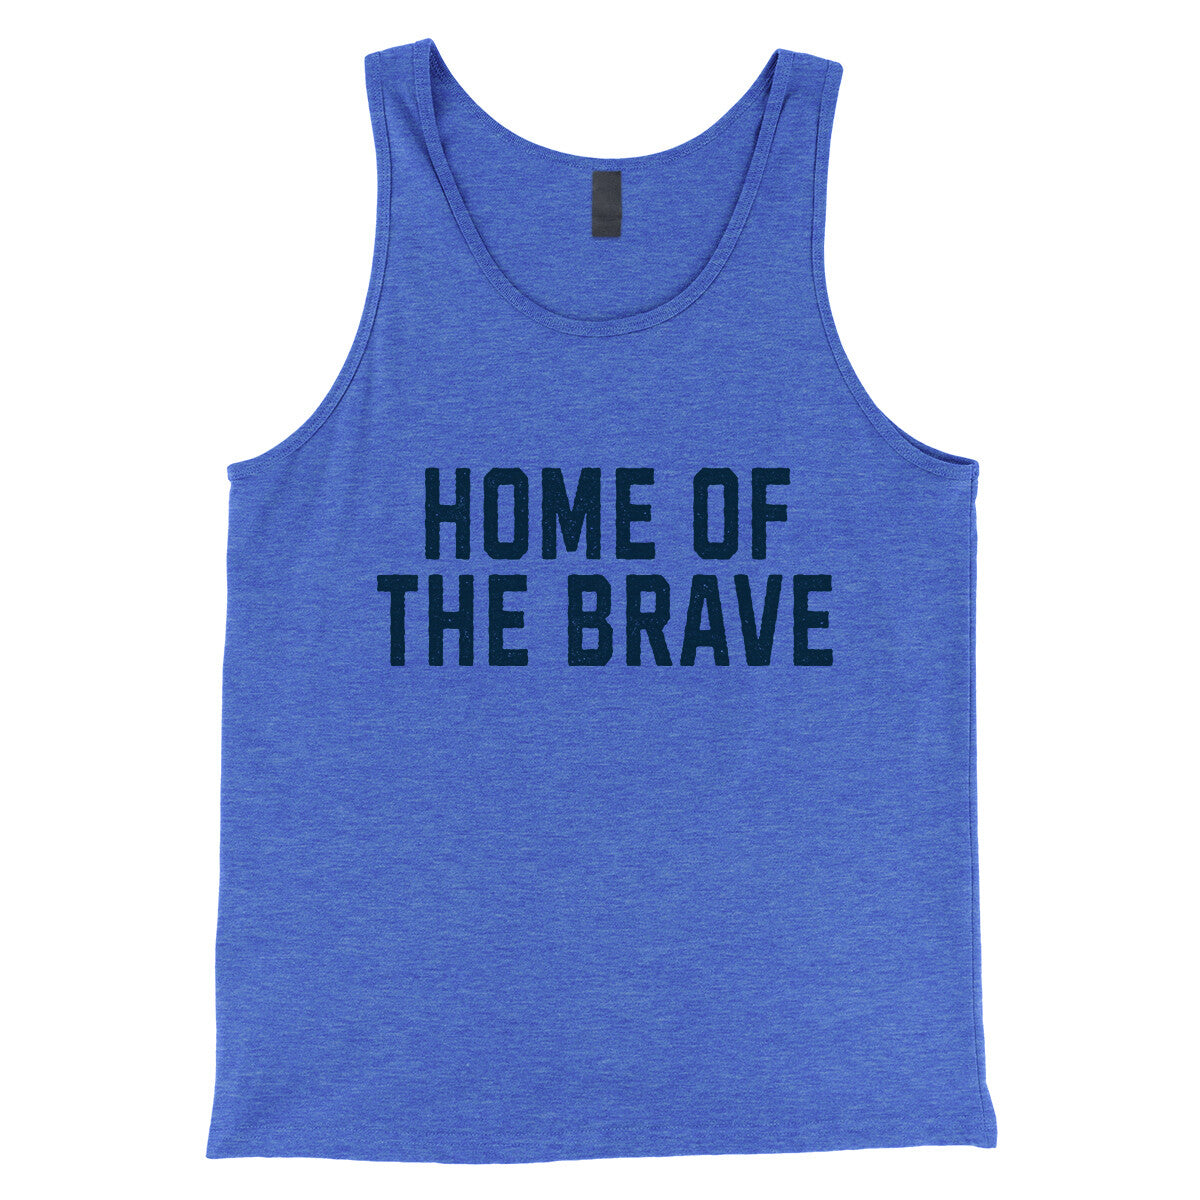 Home of the Brave in True Royal TriBlend Color